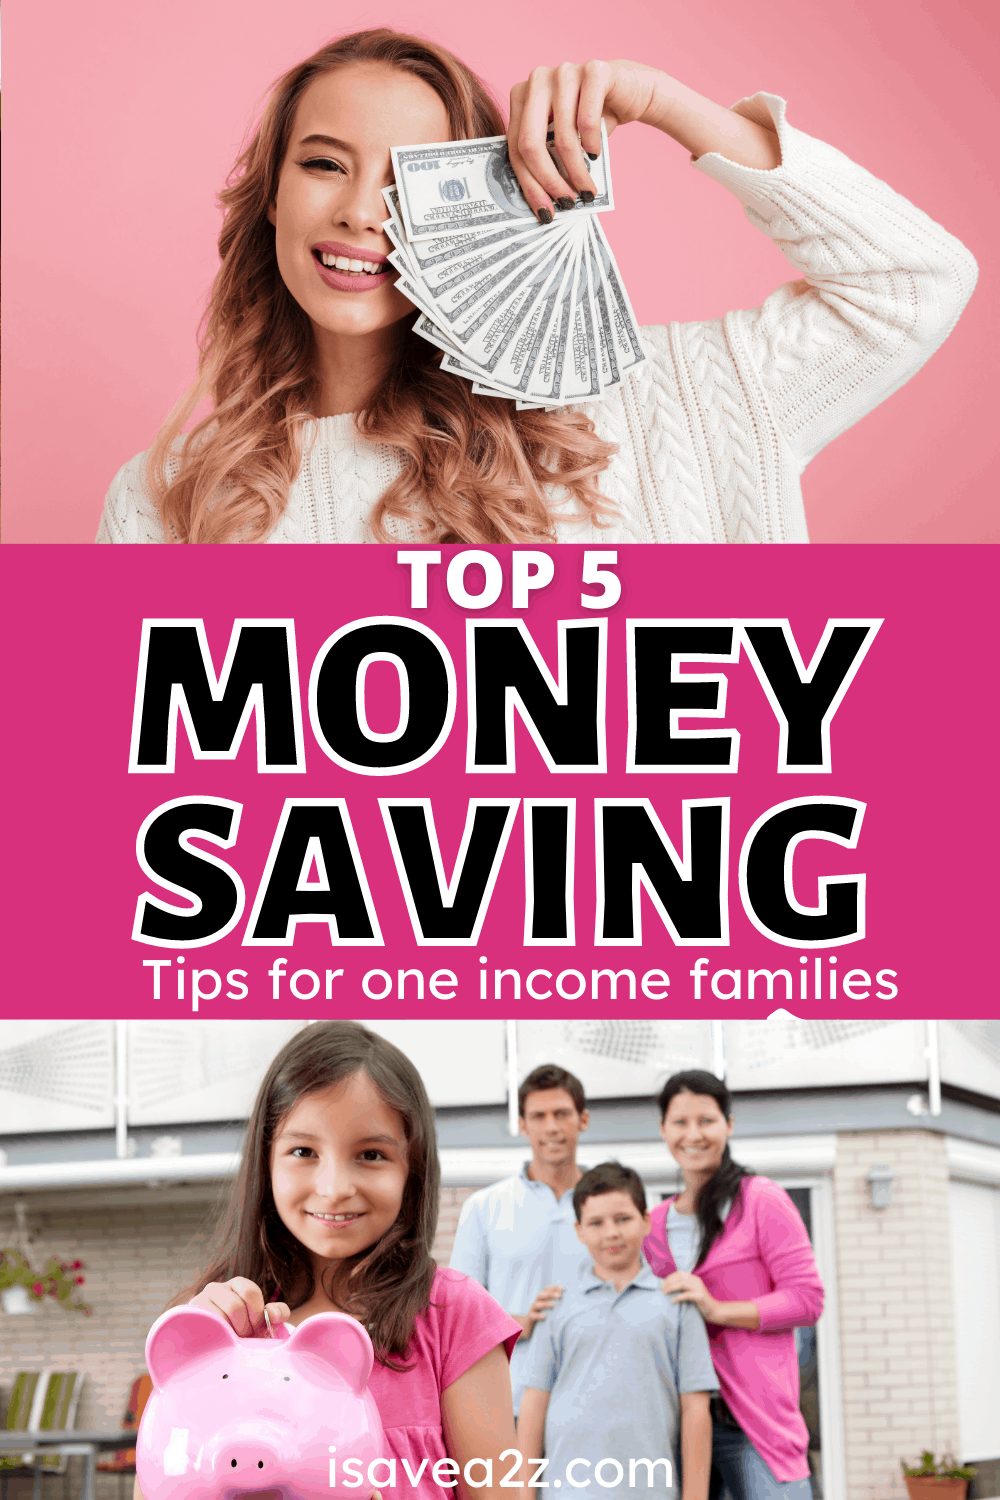 5 Tips for Families Living on One Income